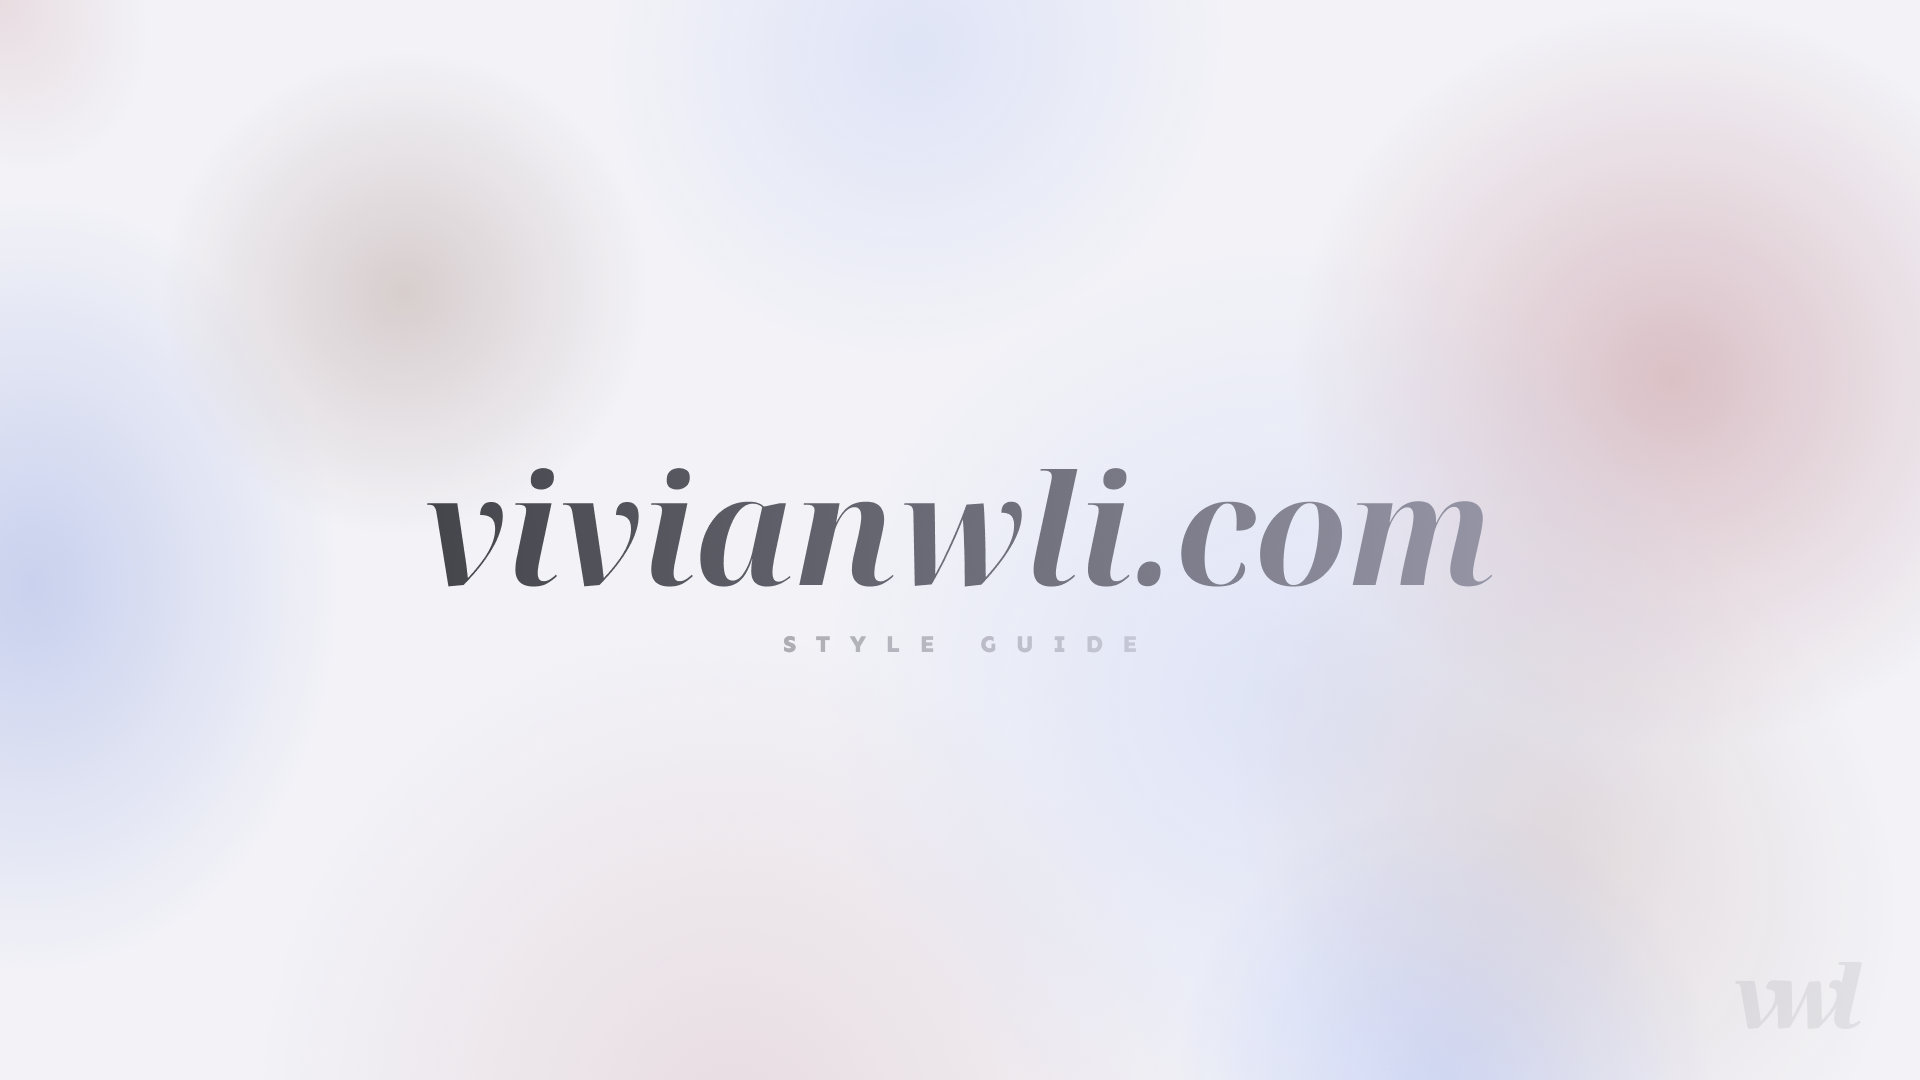 The styled covered page for my website design (vivianwli.com)